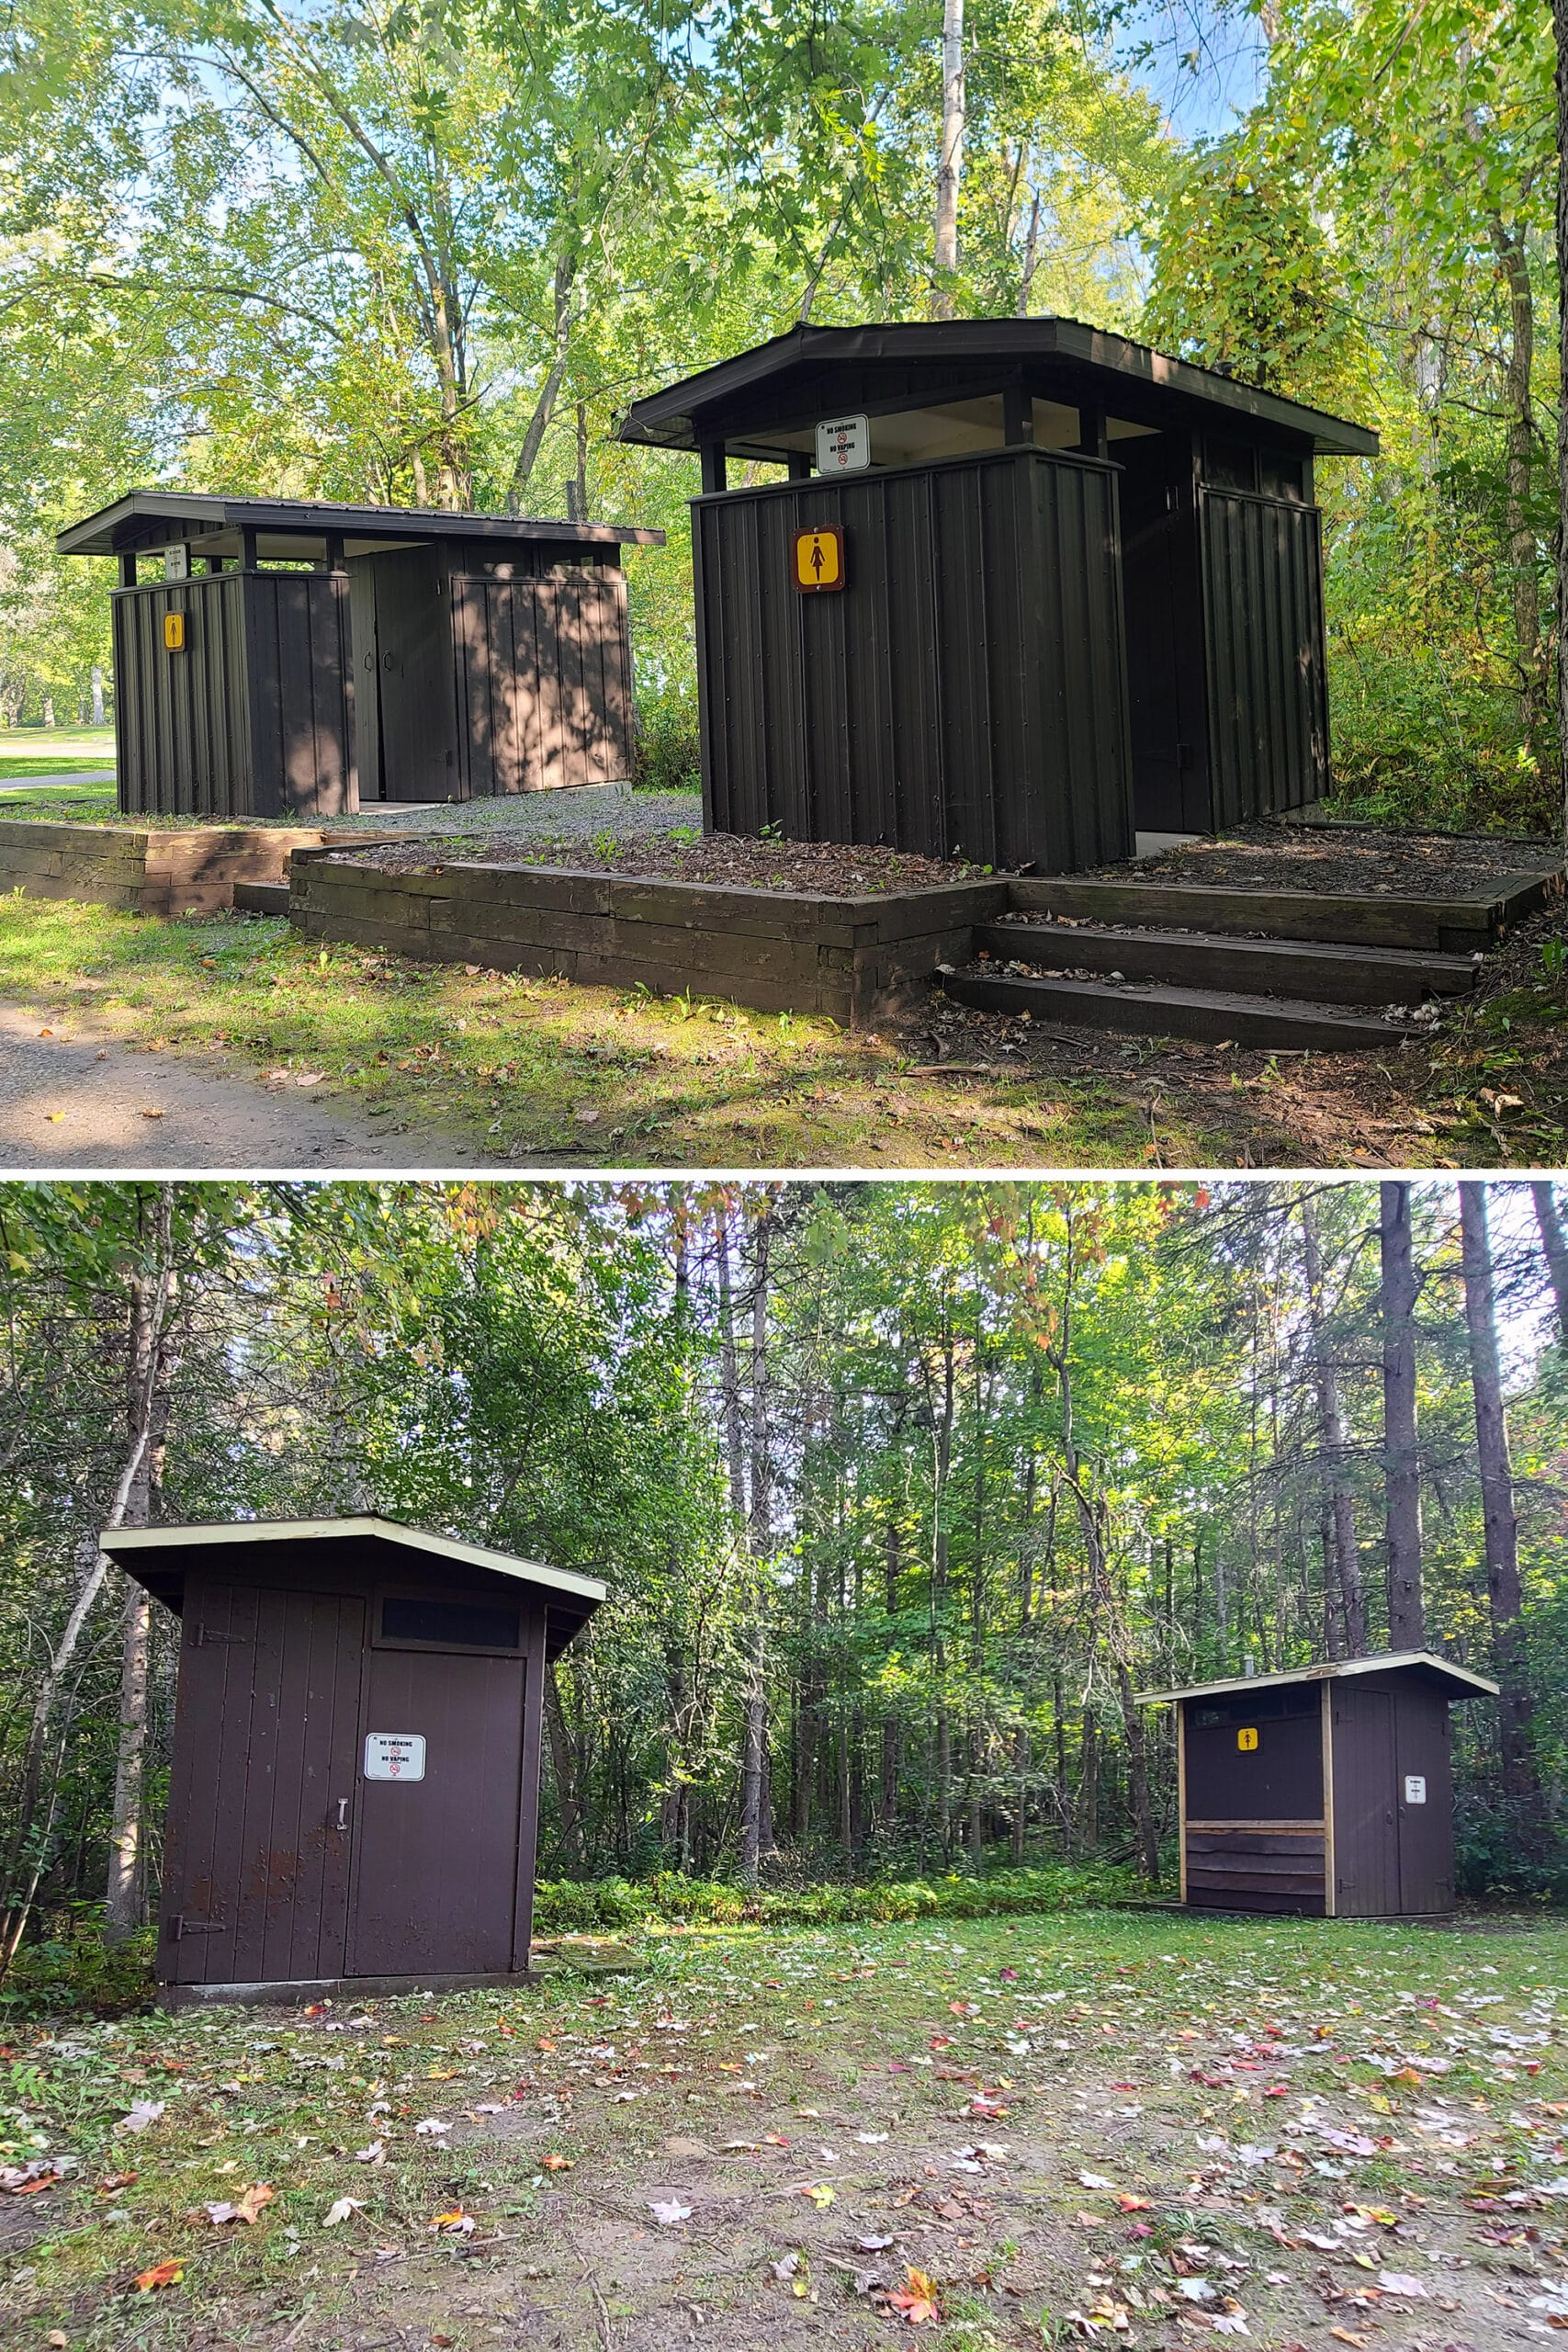 2 part image showing 2 different sets of wooden outhouses in the park.